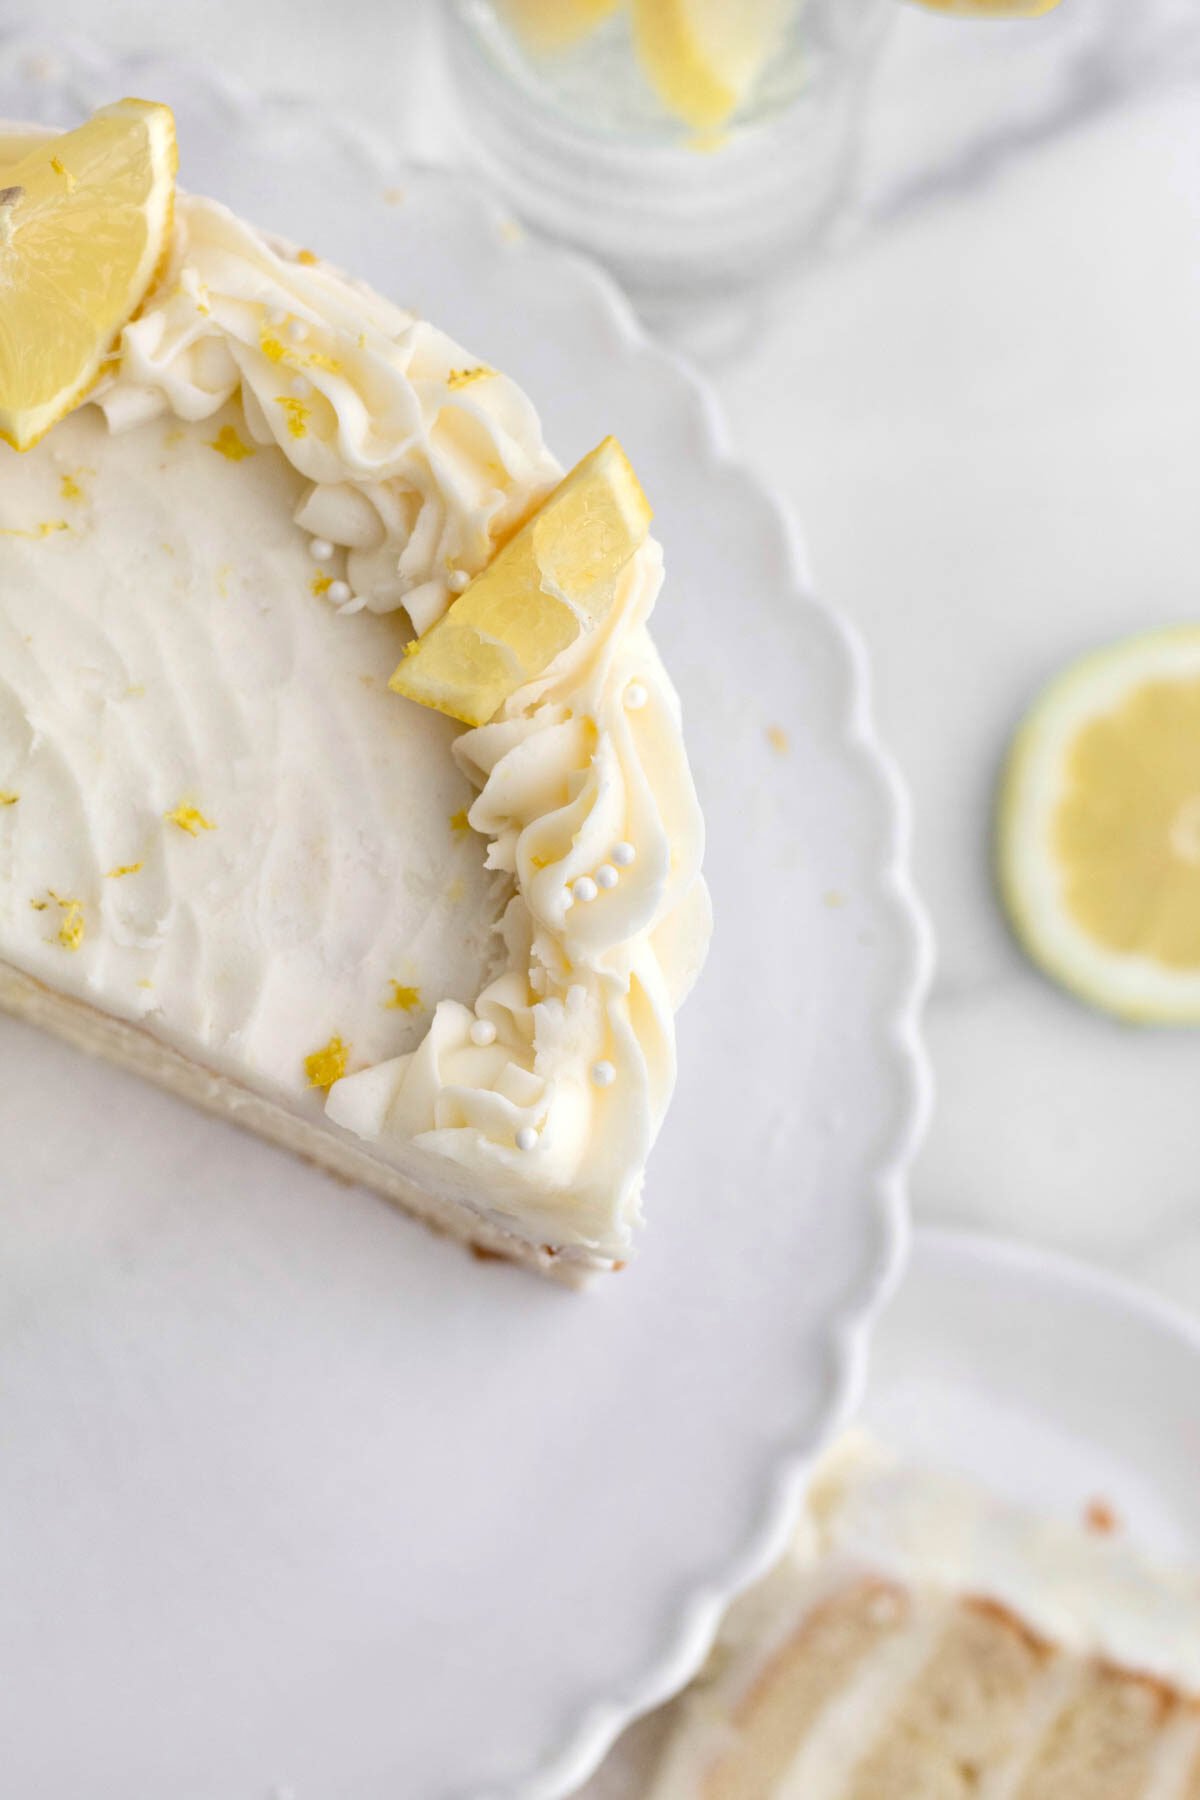 Cake with slices of lemon and frosting on a cake stand.